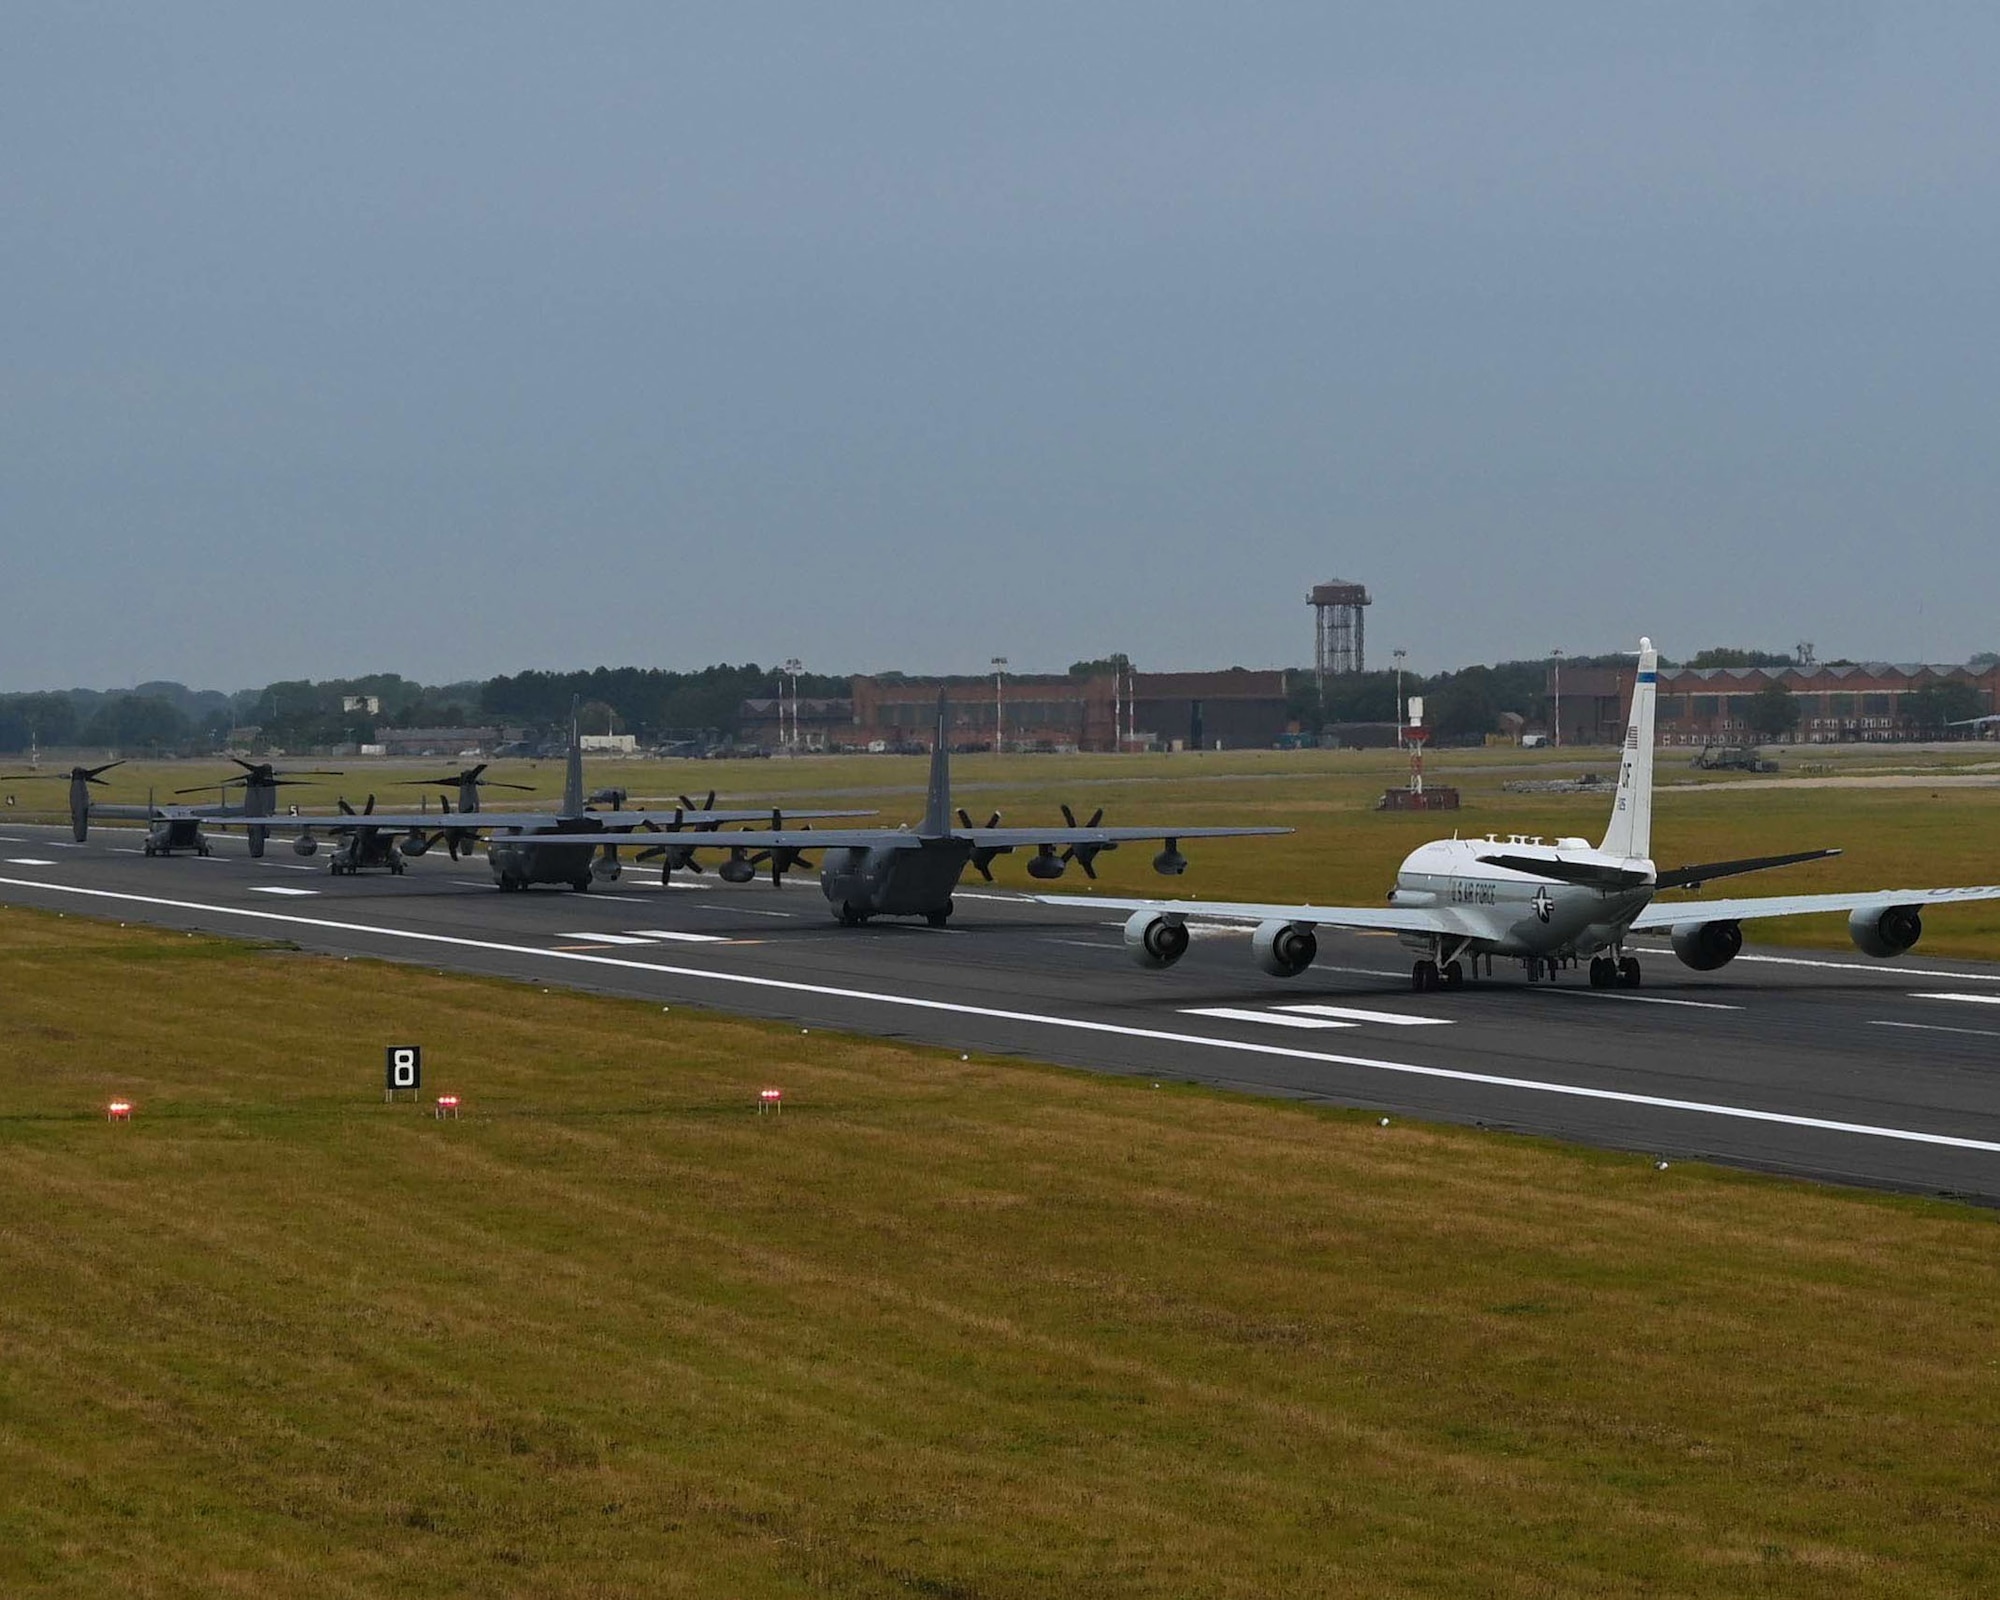 Team Mildenhall aircraft perform an elephant walk at Royal Air Force Mildenhall, England, Sept. 13, 2021. An elephant walk is a term used by the U.S. Air Force when multiple aircraft taxi together before takeoff. (U.S. Air Force photo by Airman 1st Class Viviam Chiu).